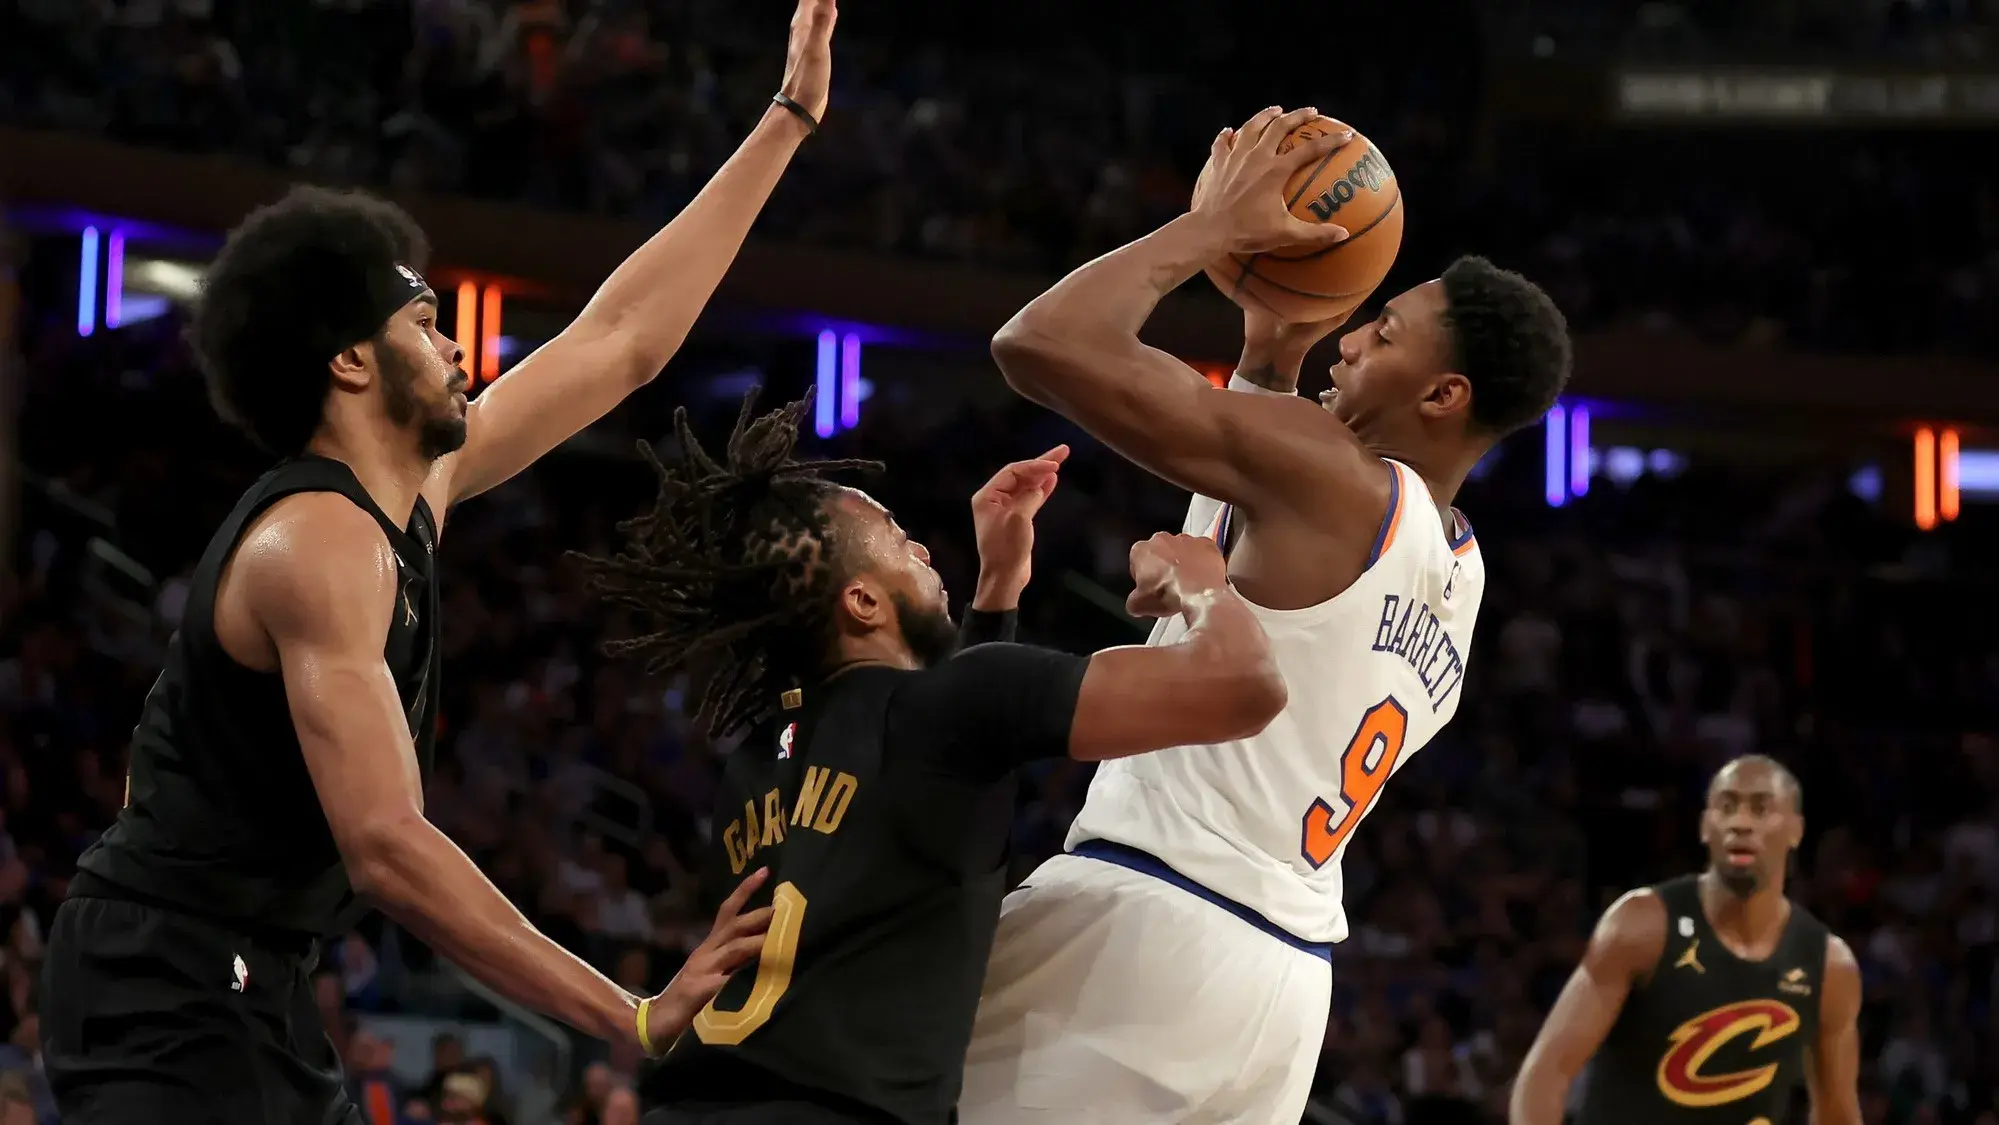 Apr 21, 2023; New York, New York, USA; New York Knicks guard RJ Barrett (9) drives to the basket against Cleveland Cavaliers center Jarrett Allen (31) and guards Darius Garland (10) and Caris LeVert (3) during the fourth quarter of game three of the 2023 NBA playoffs at Madison Square Garden. / Brad Penner-USA TODAY Sports